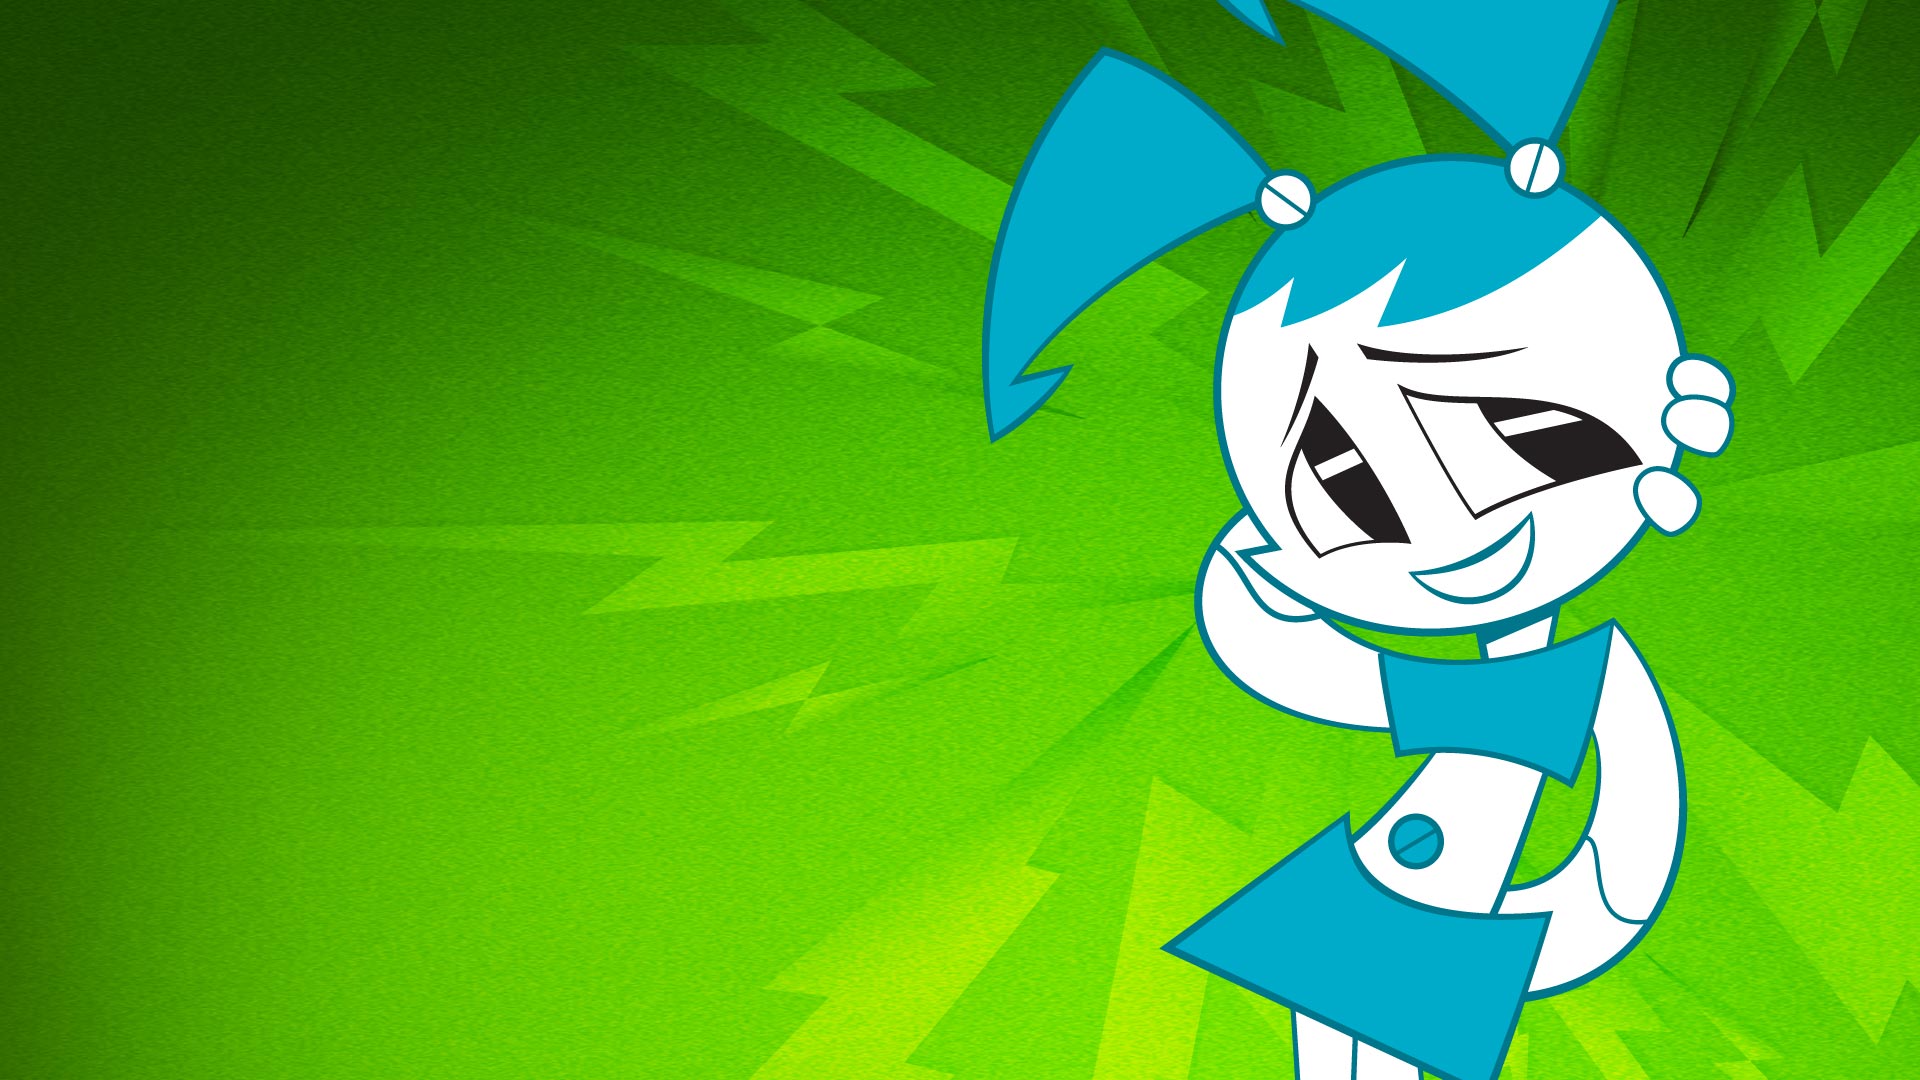 My Life As A Teenage Robot Wallpapers